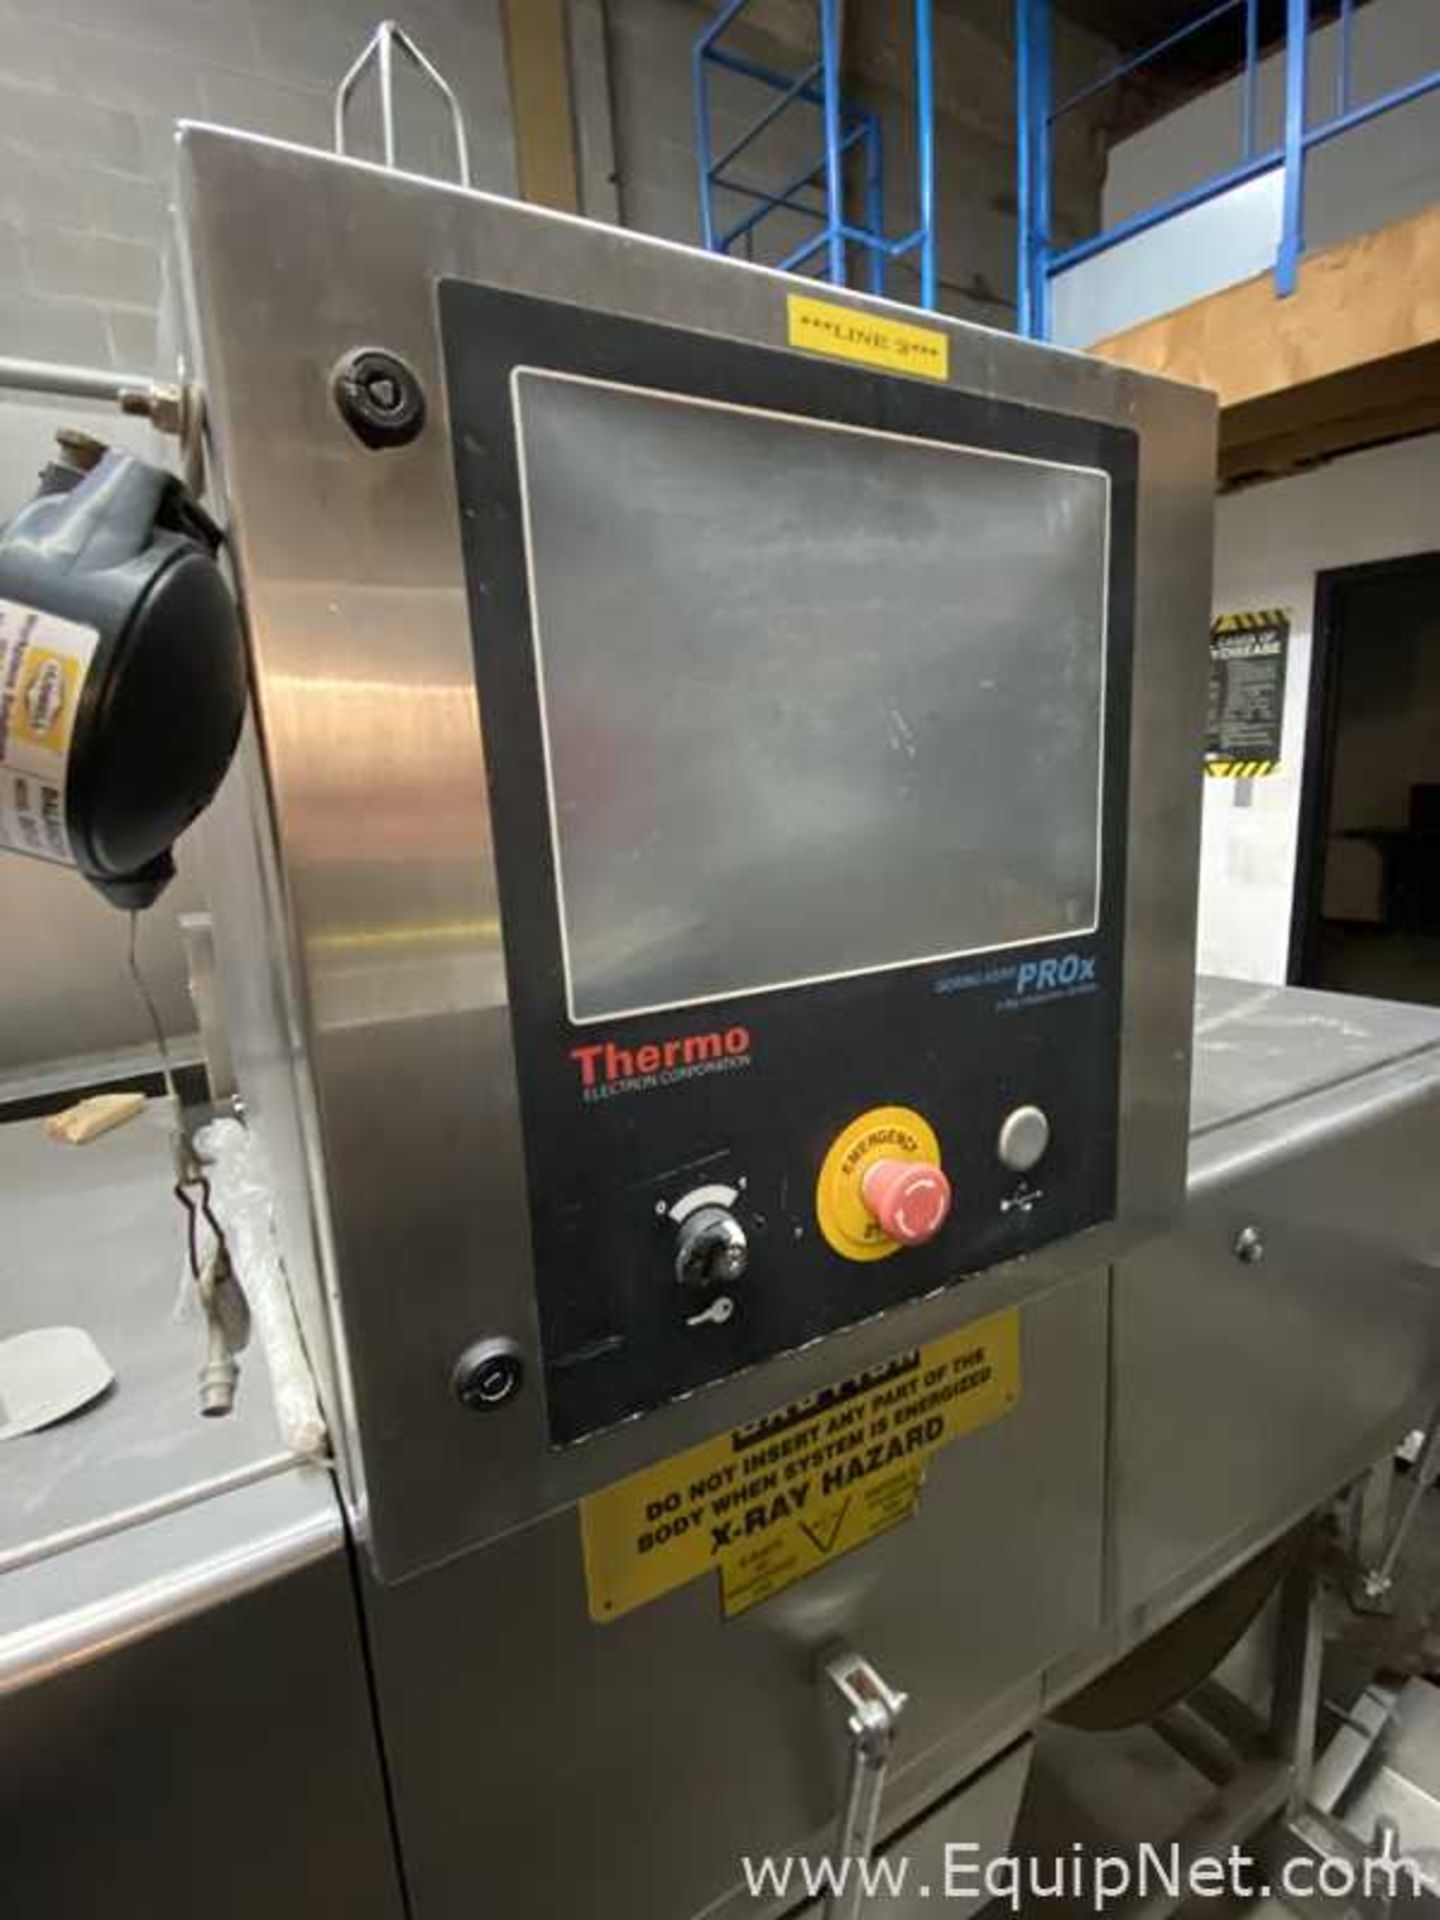 Thermo PROx X-ray Inspection System - Image 3 of 5